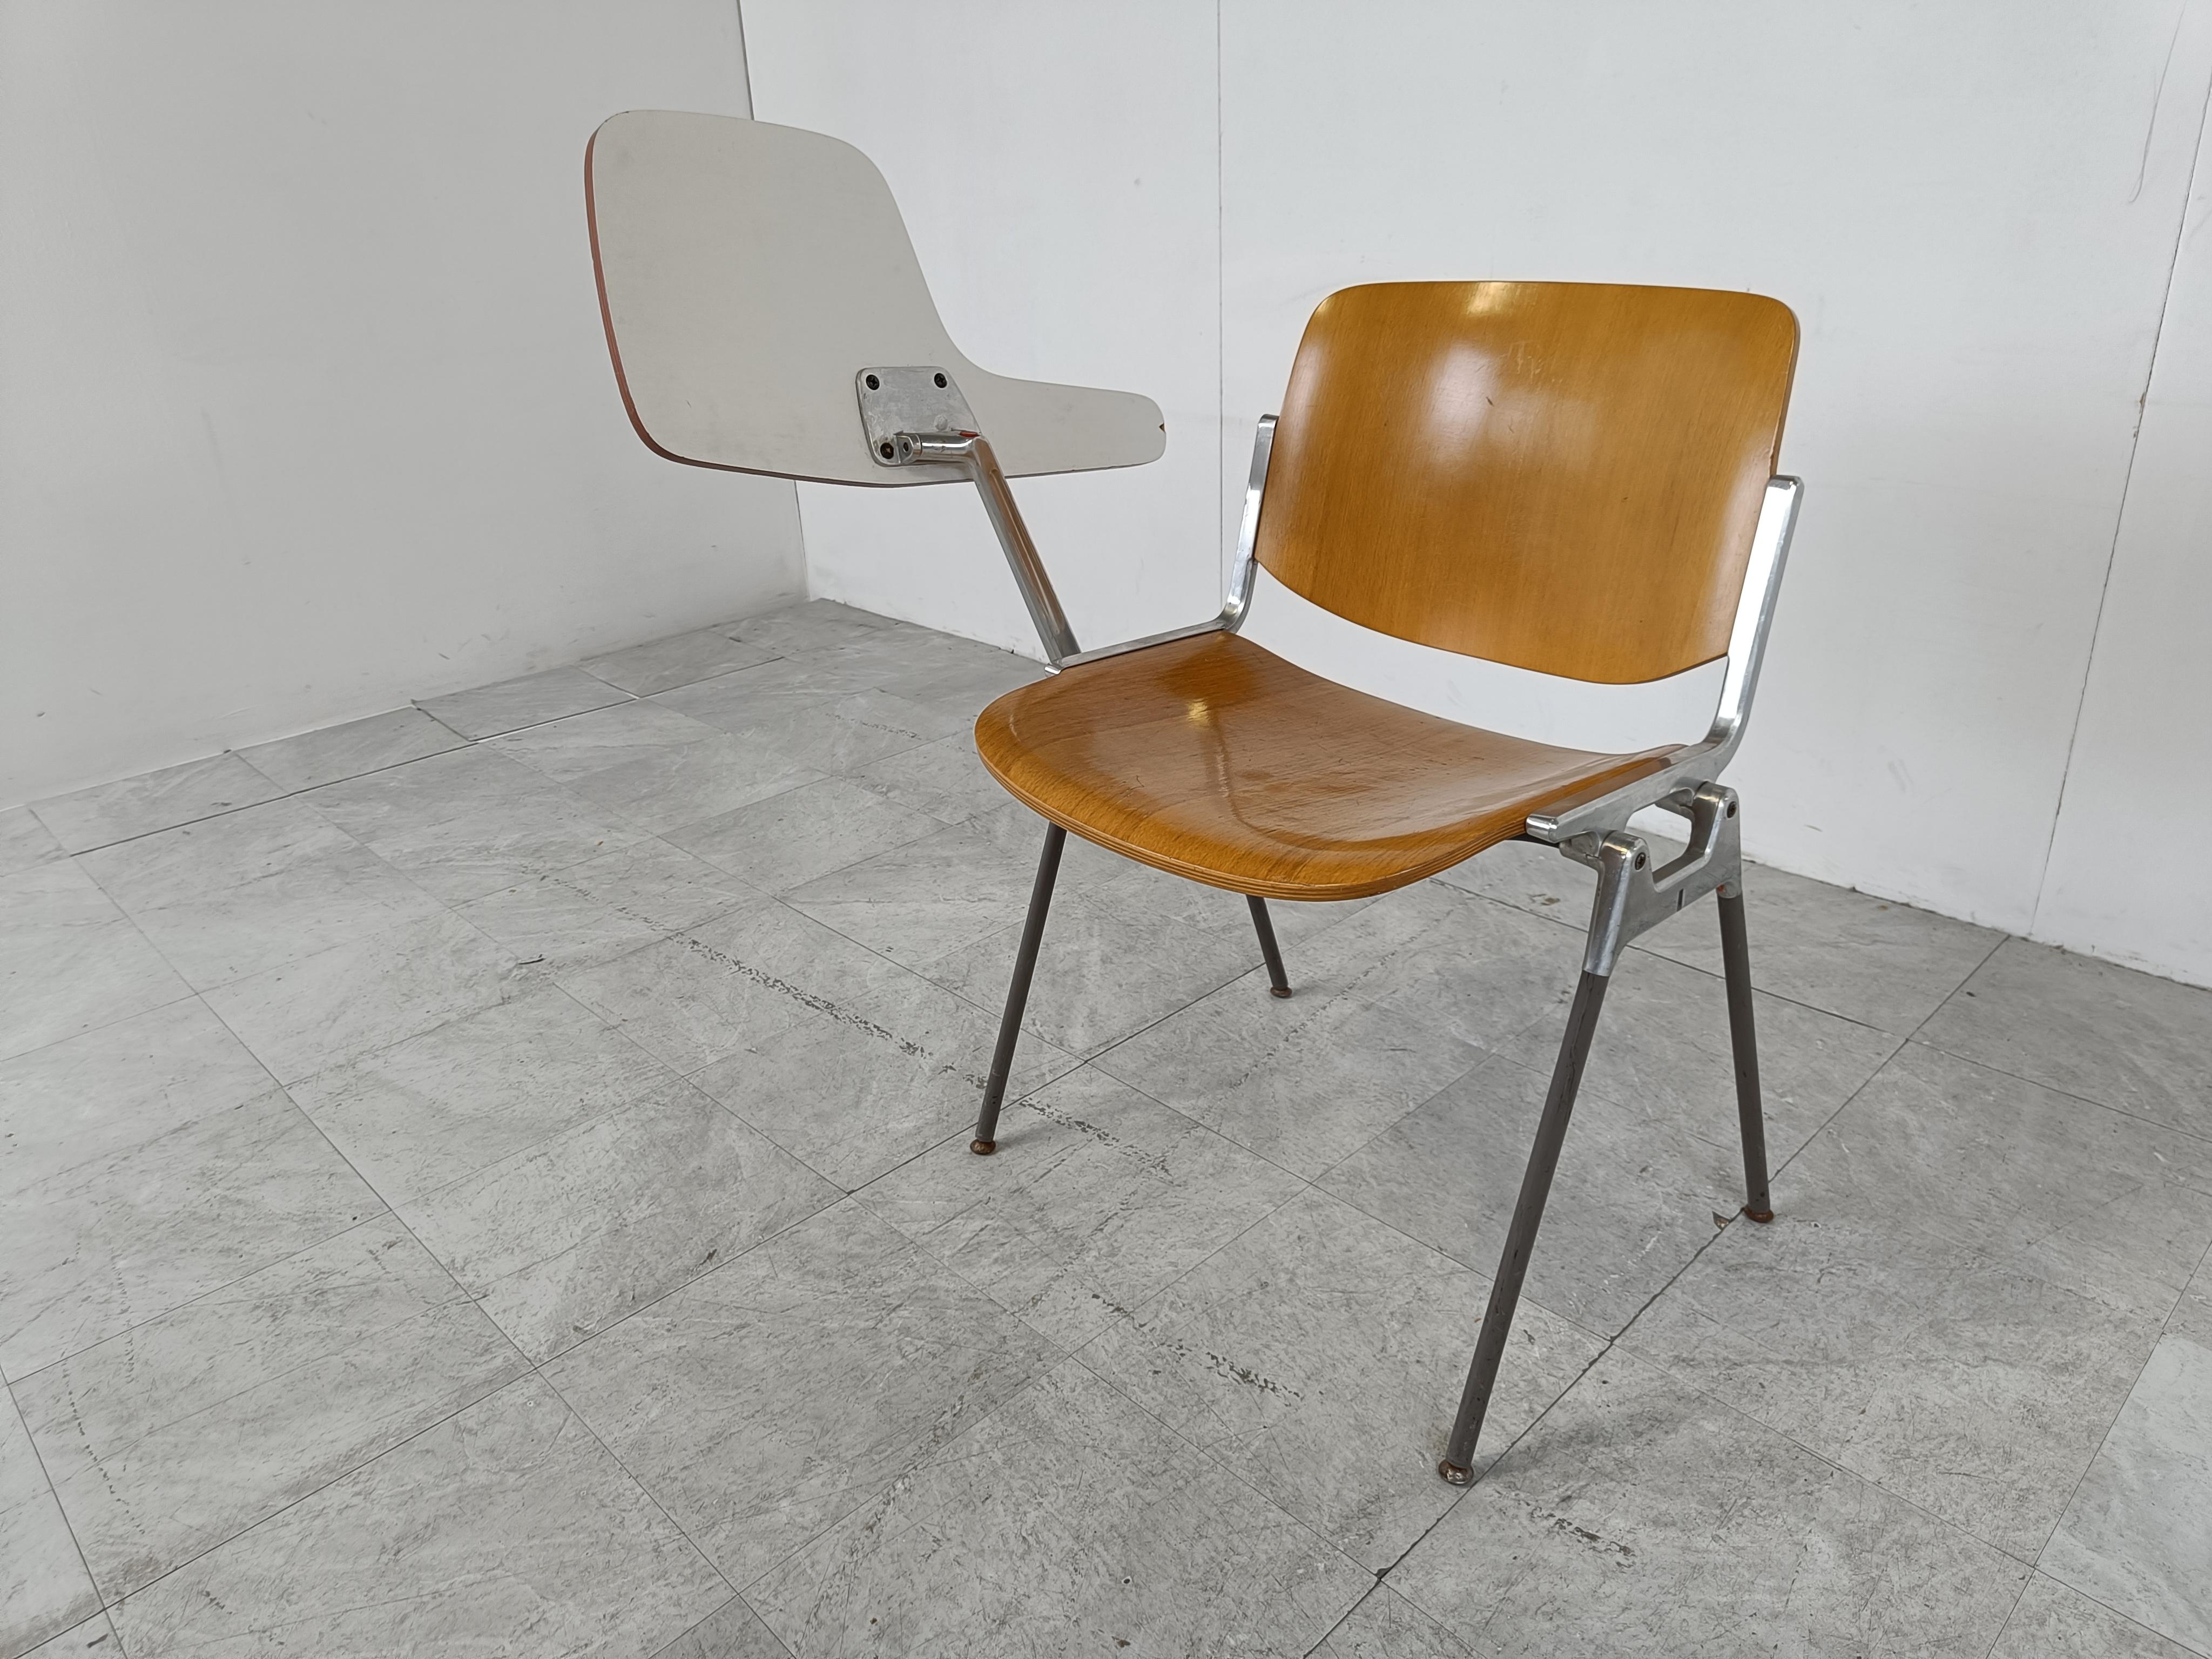 Vintage Dsc 106 Chair by Giancarlo Piretti for Castelli with Folding Table, 1970 For Sale 3